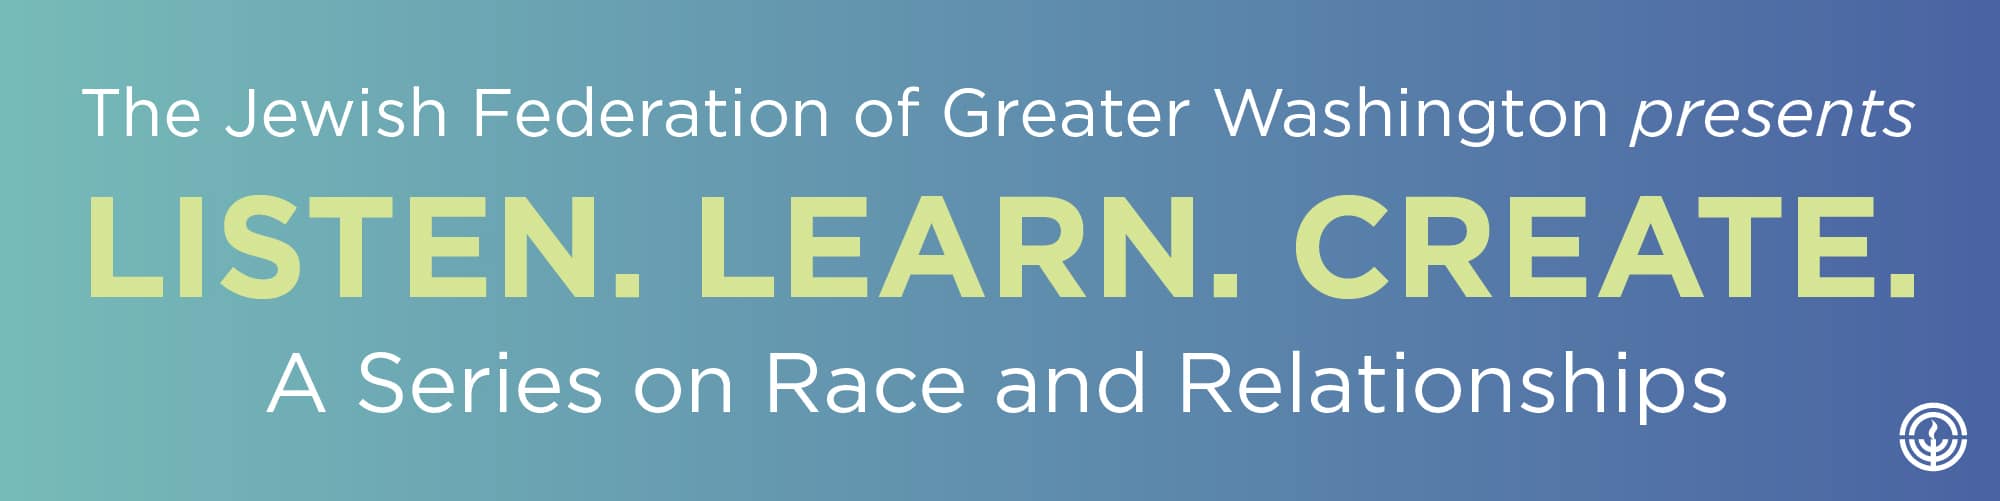 Listen Learn Create, A Series on Race and Relationships Banner